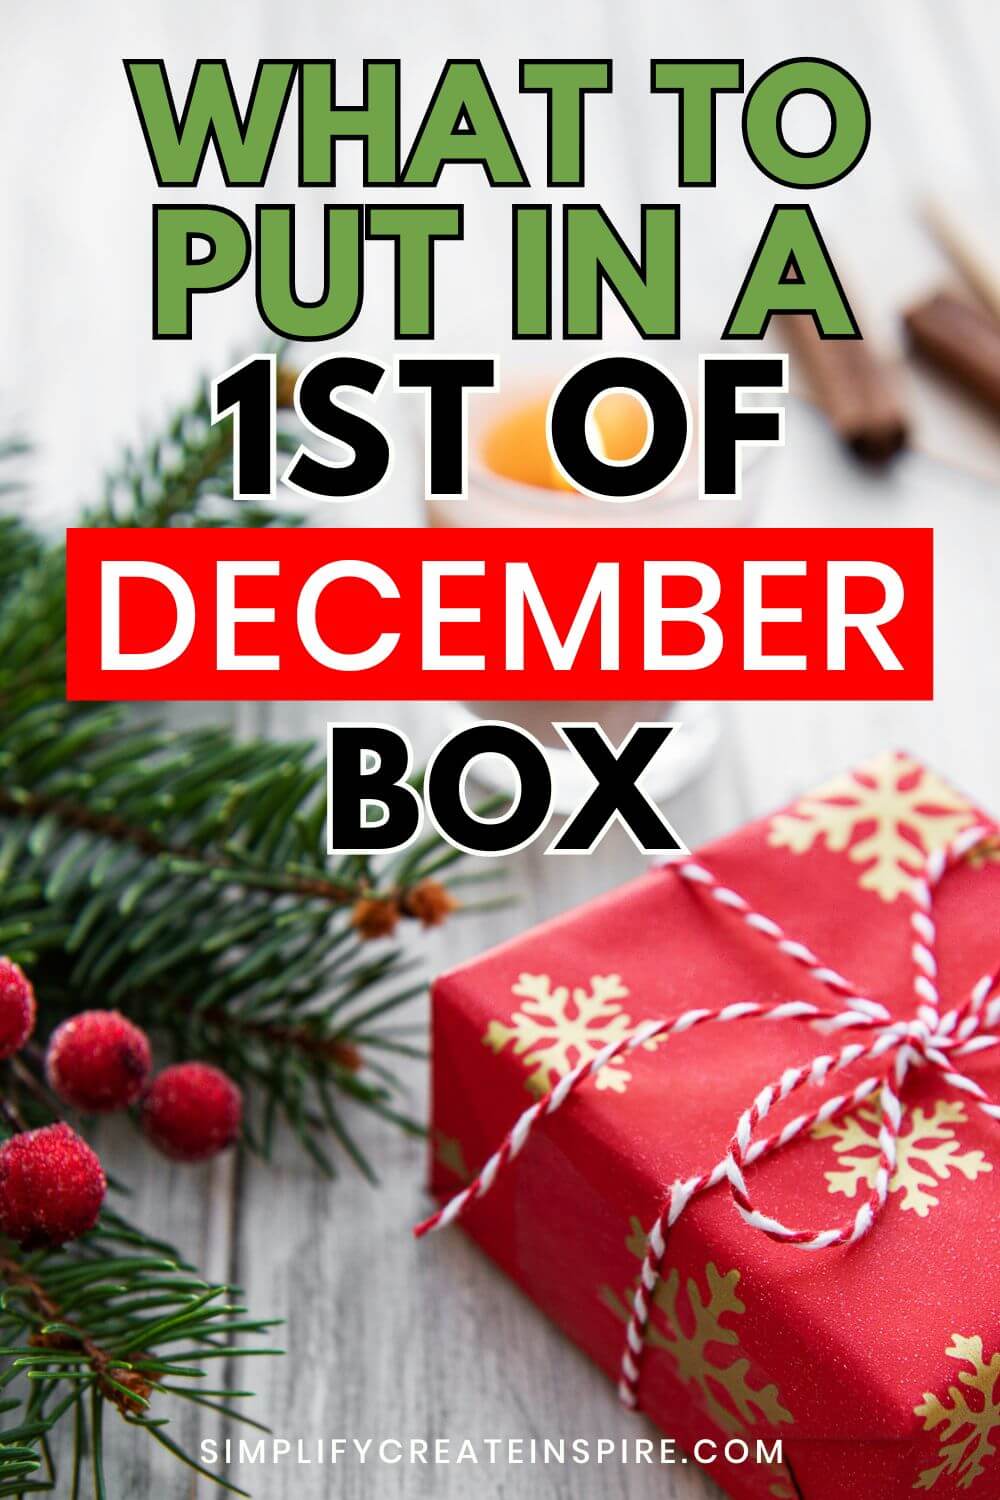 What to put in a 1st of december box ideas